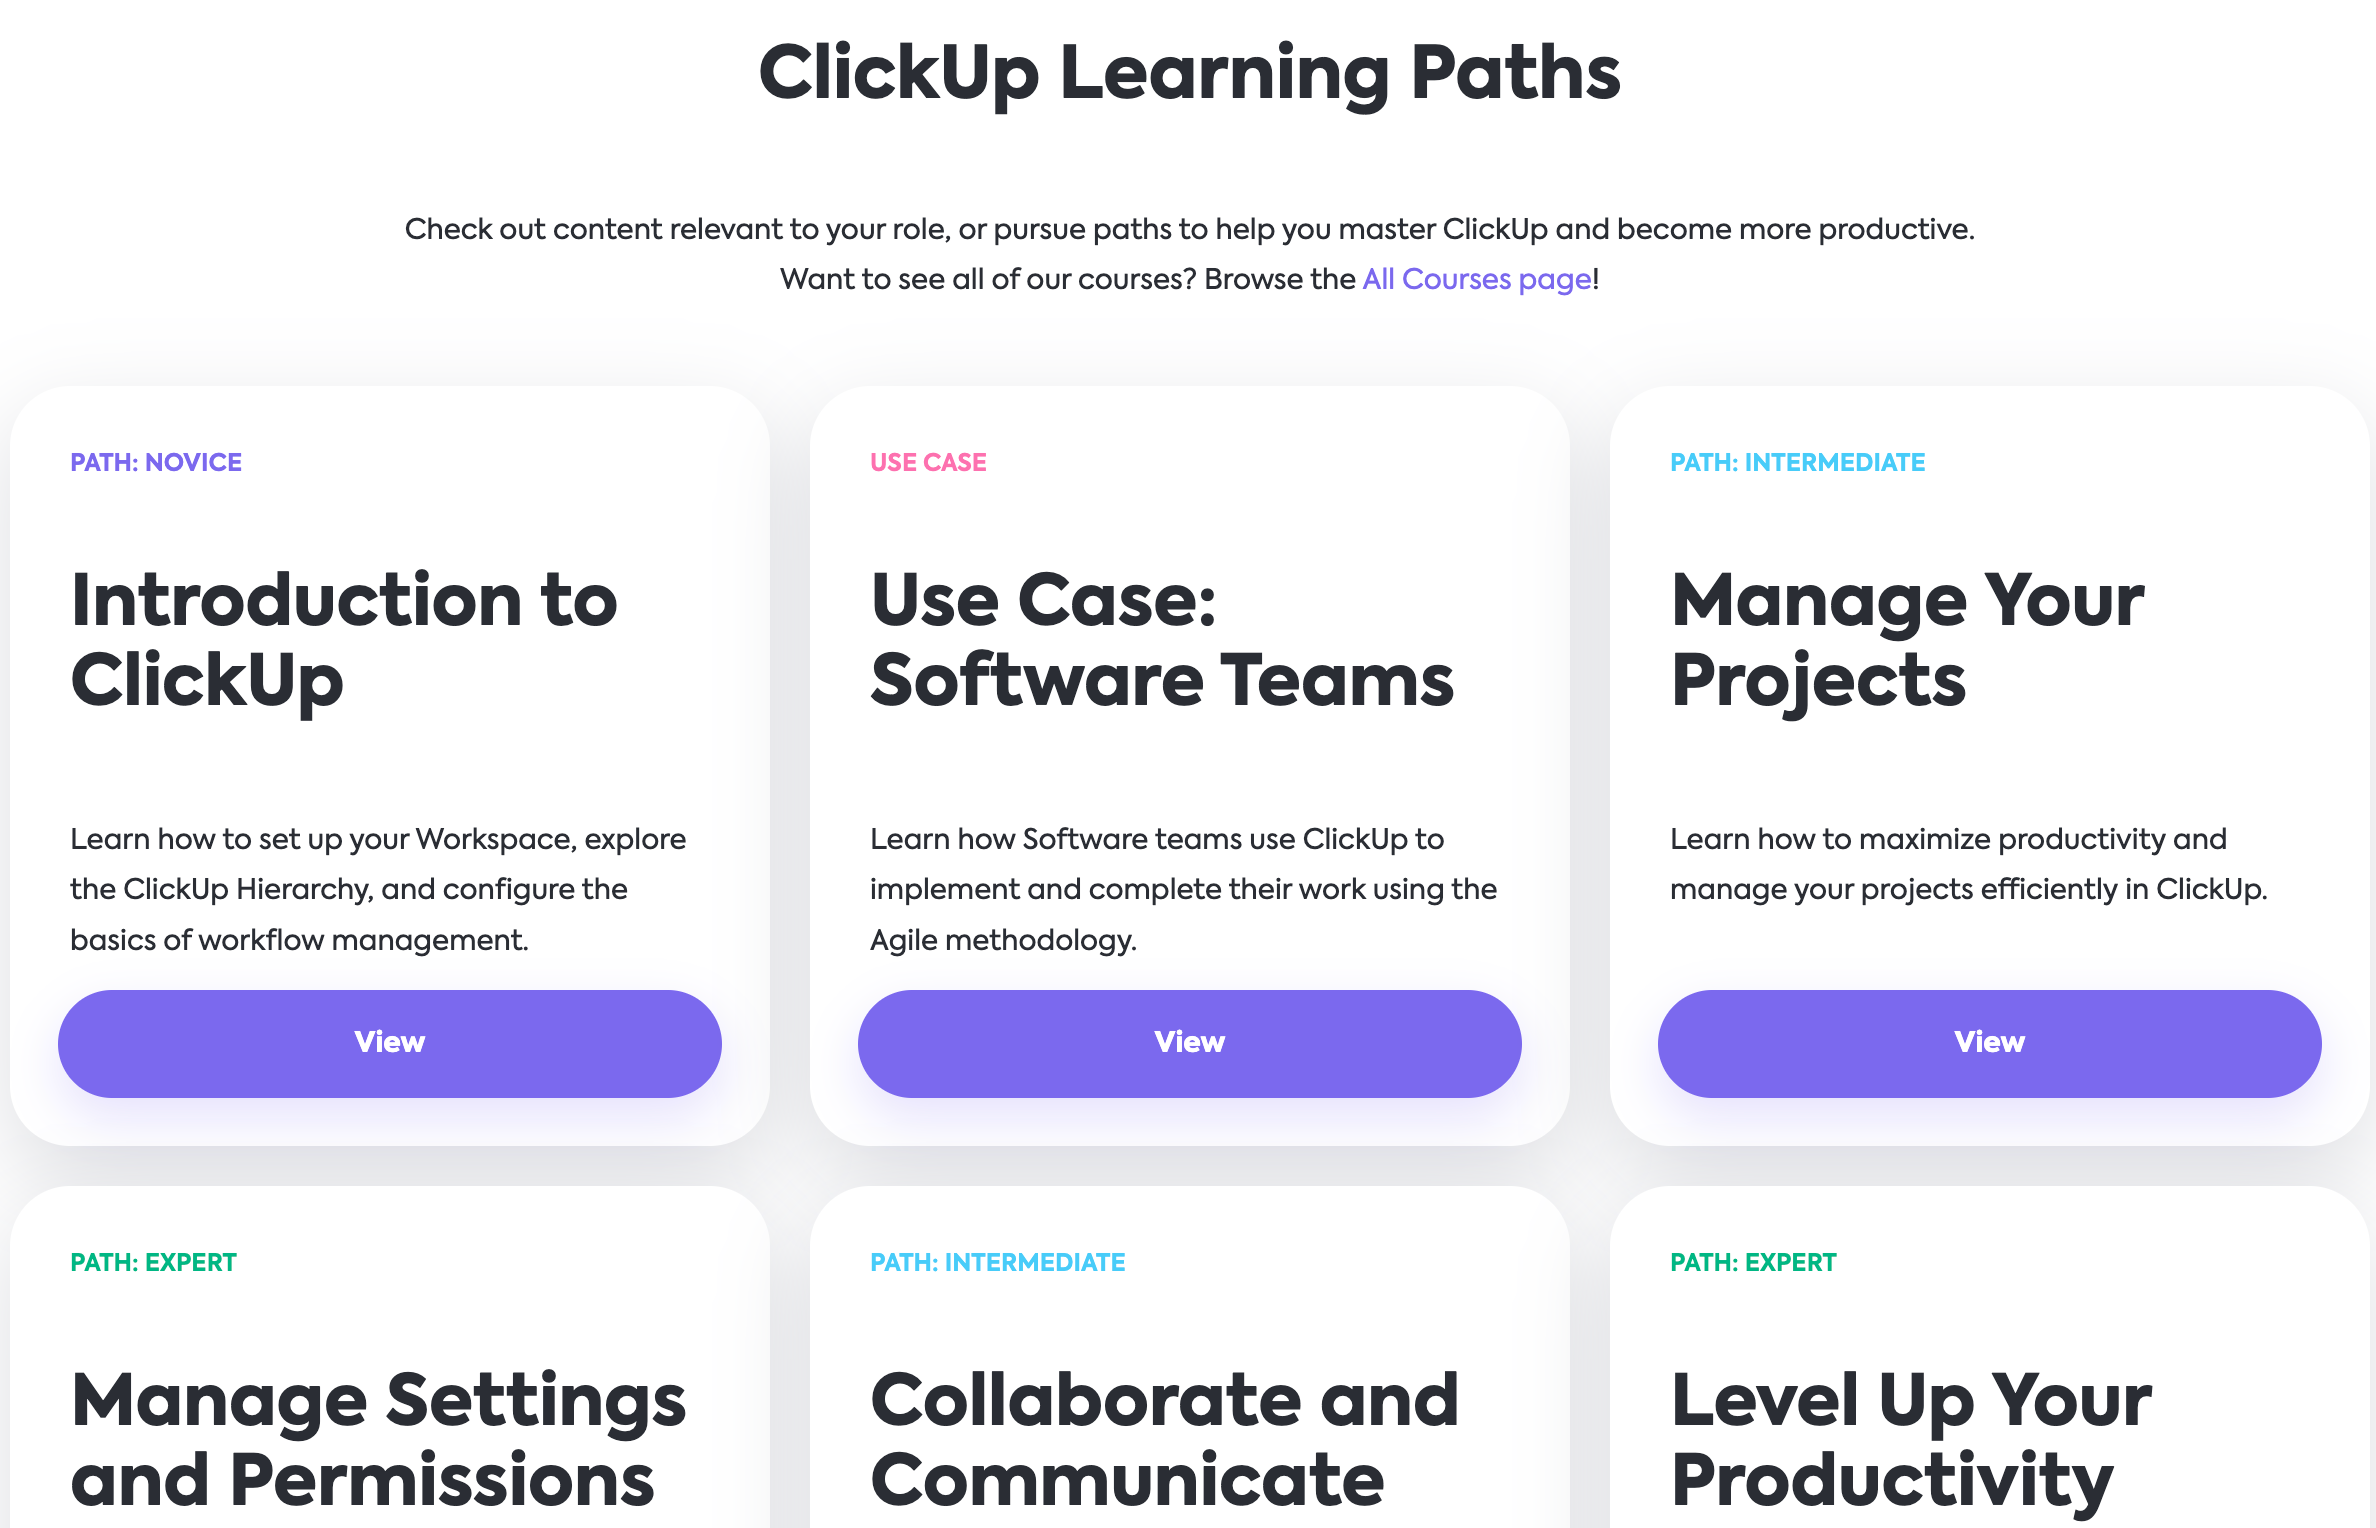 Screenshot of the ClickUp University Learning Paths page.